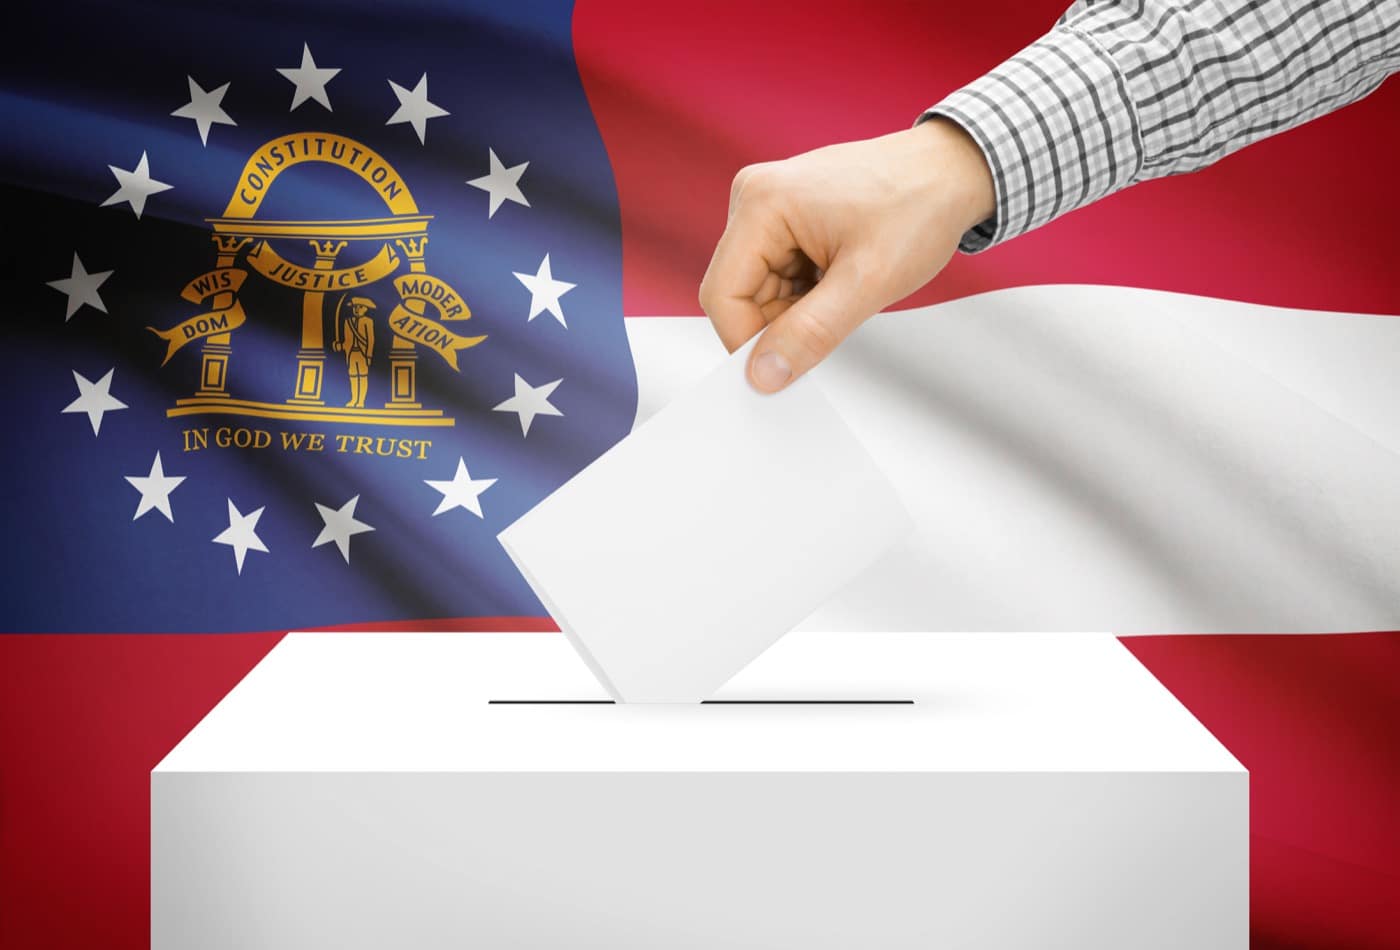 Georgia election officials will have a public hearing on Athens-Clarke County's decision to suspend use of new voting system